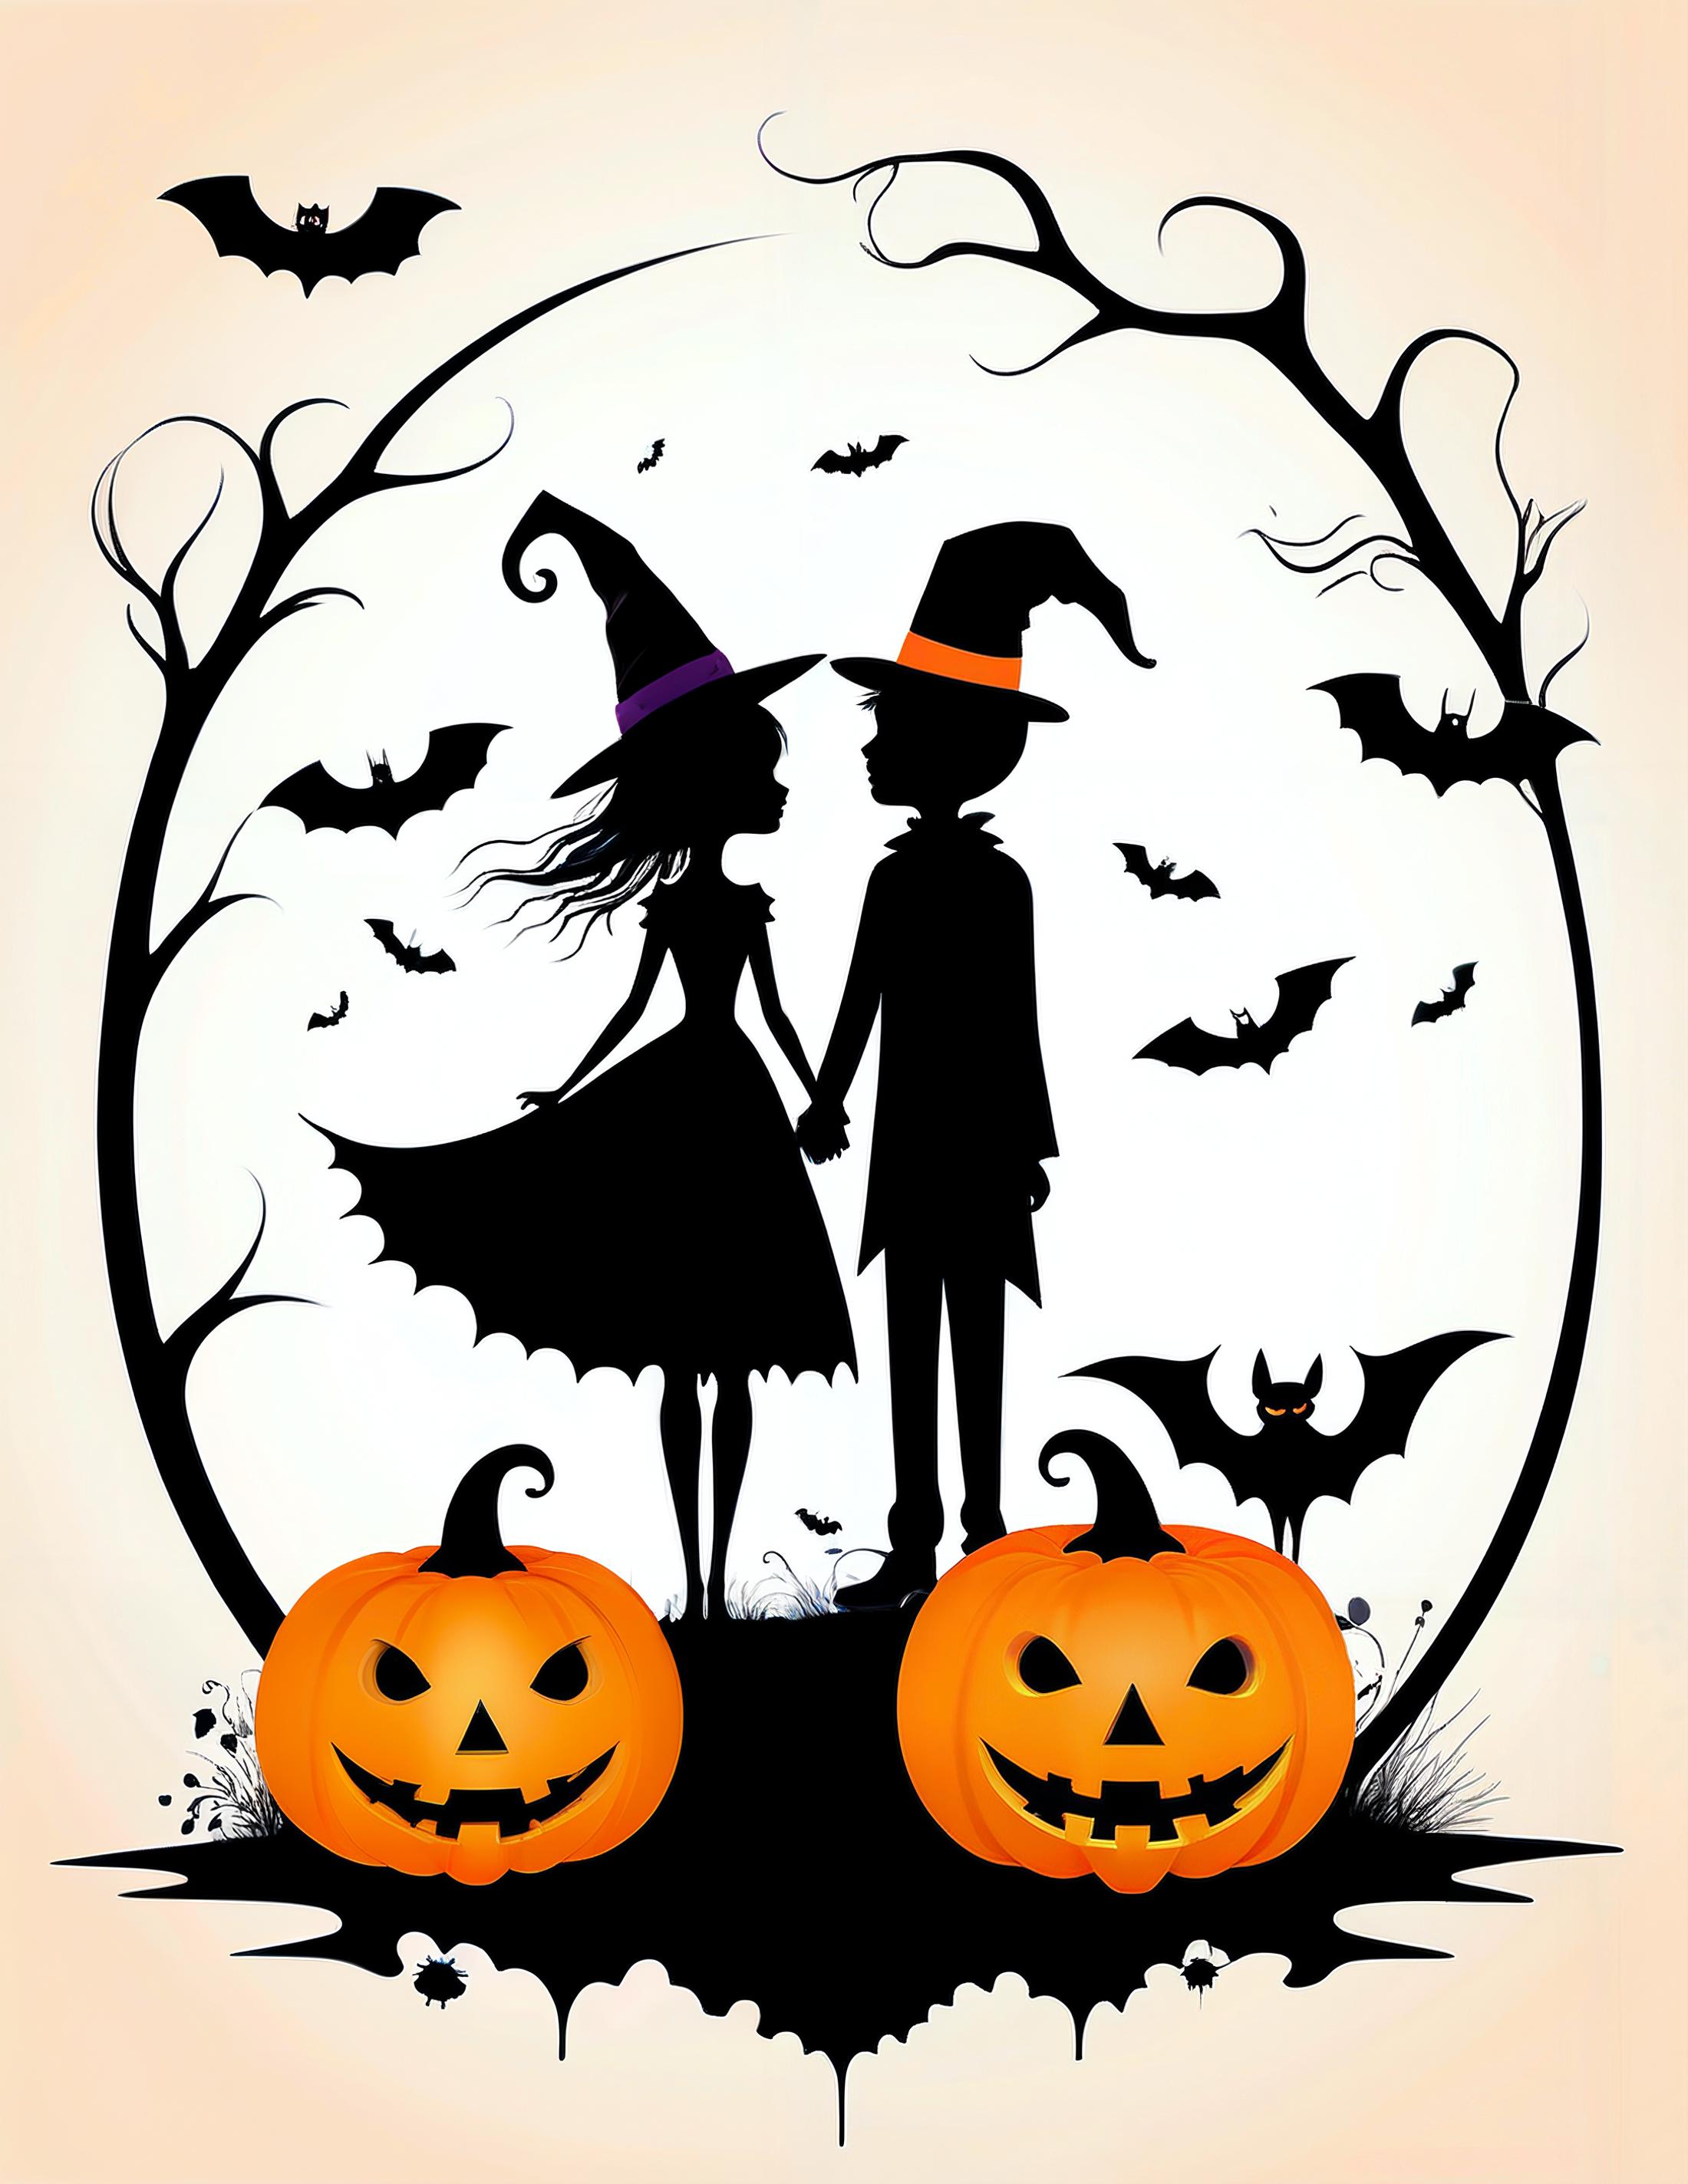 Halloween Whimsical - Wildcards image by Diva